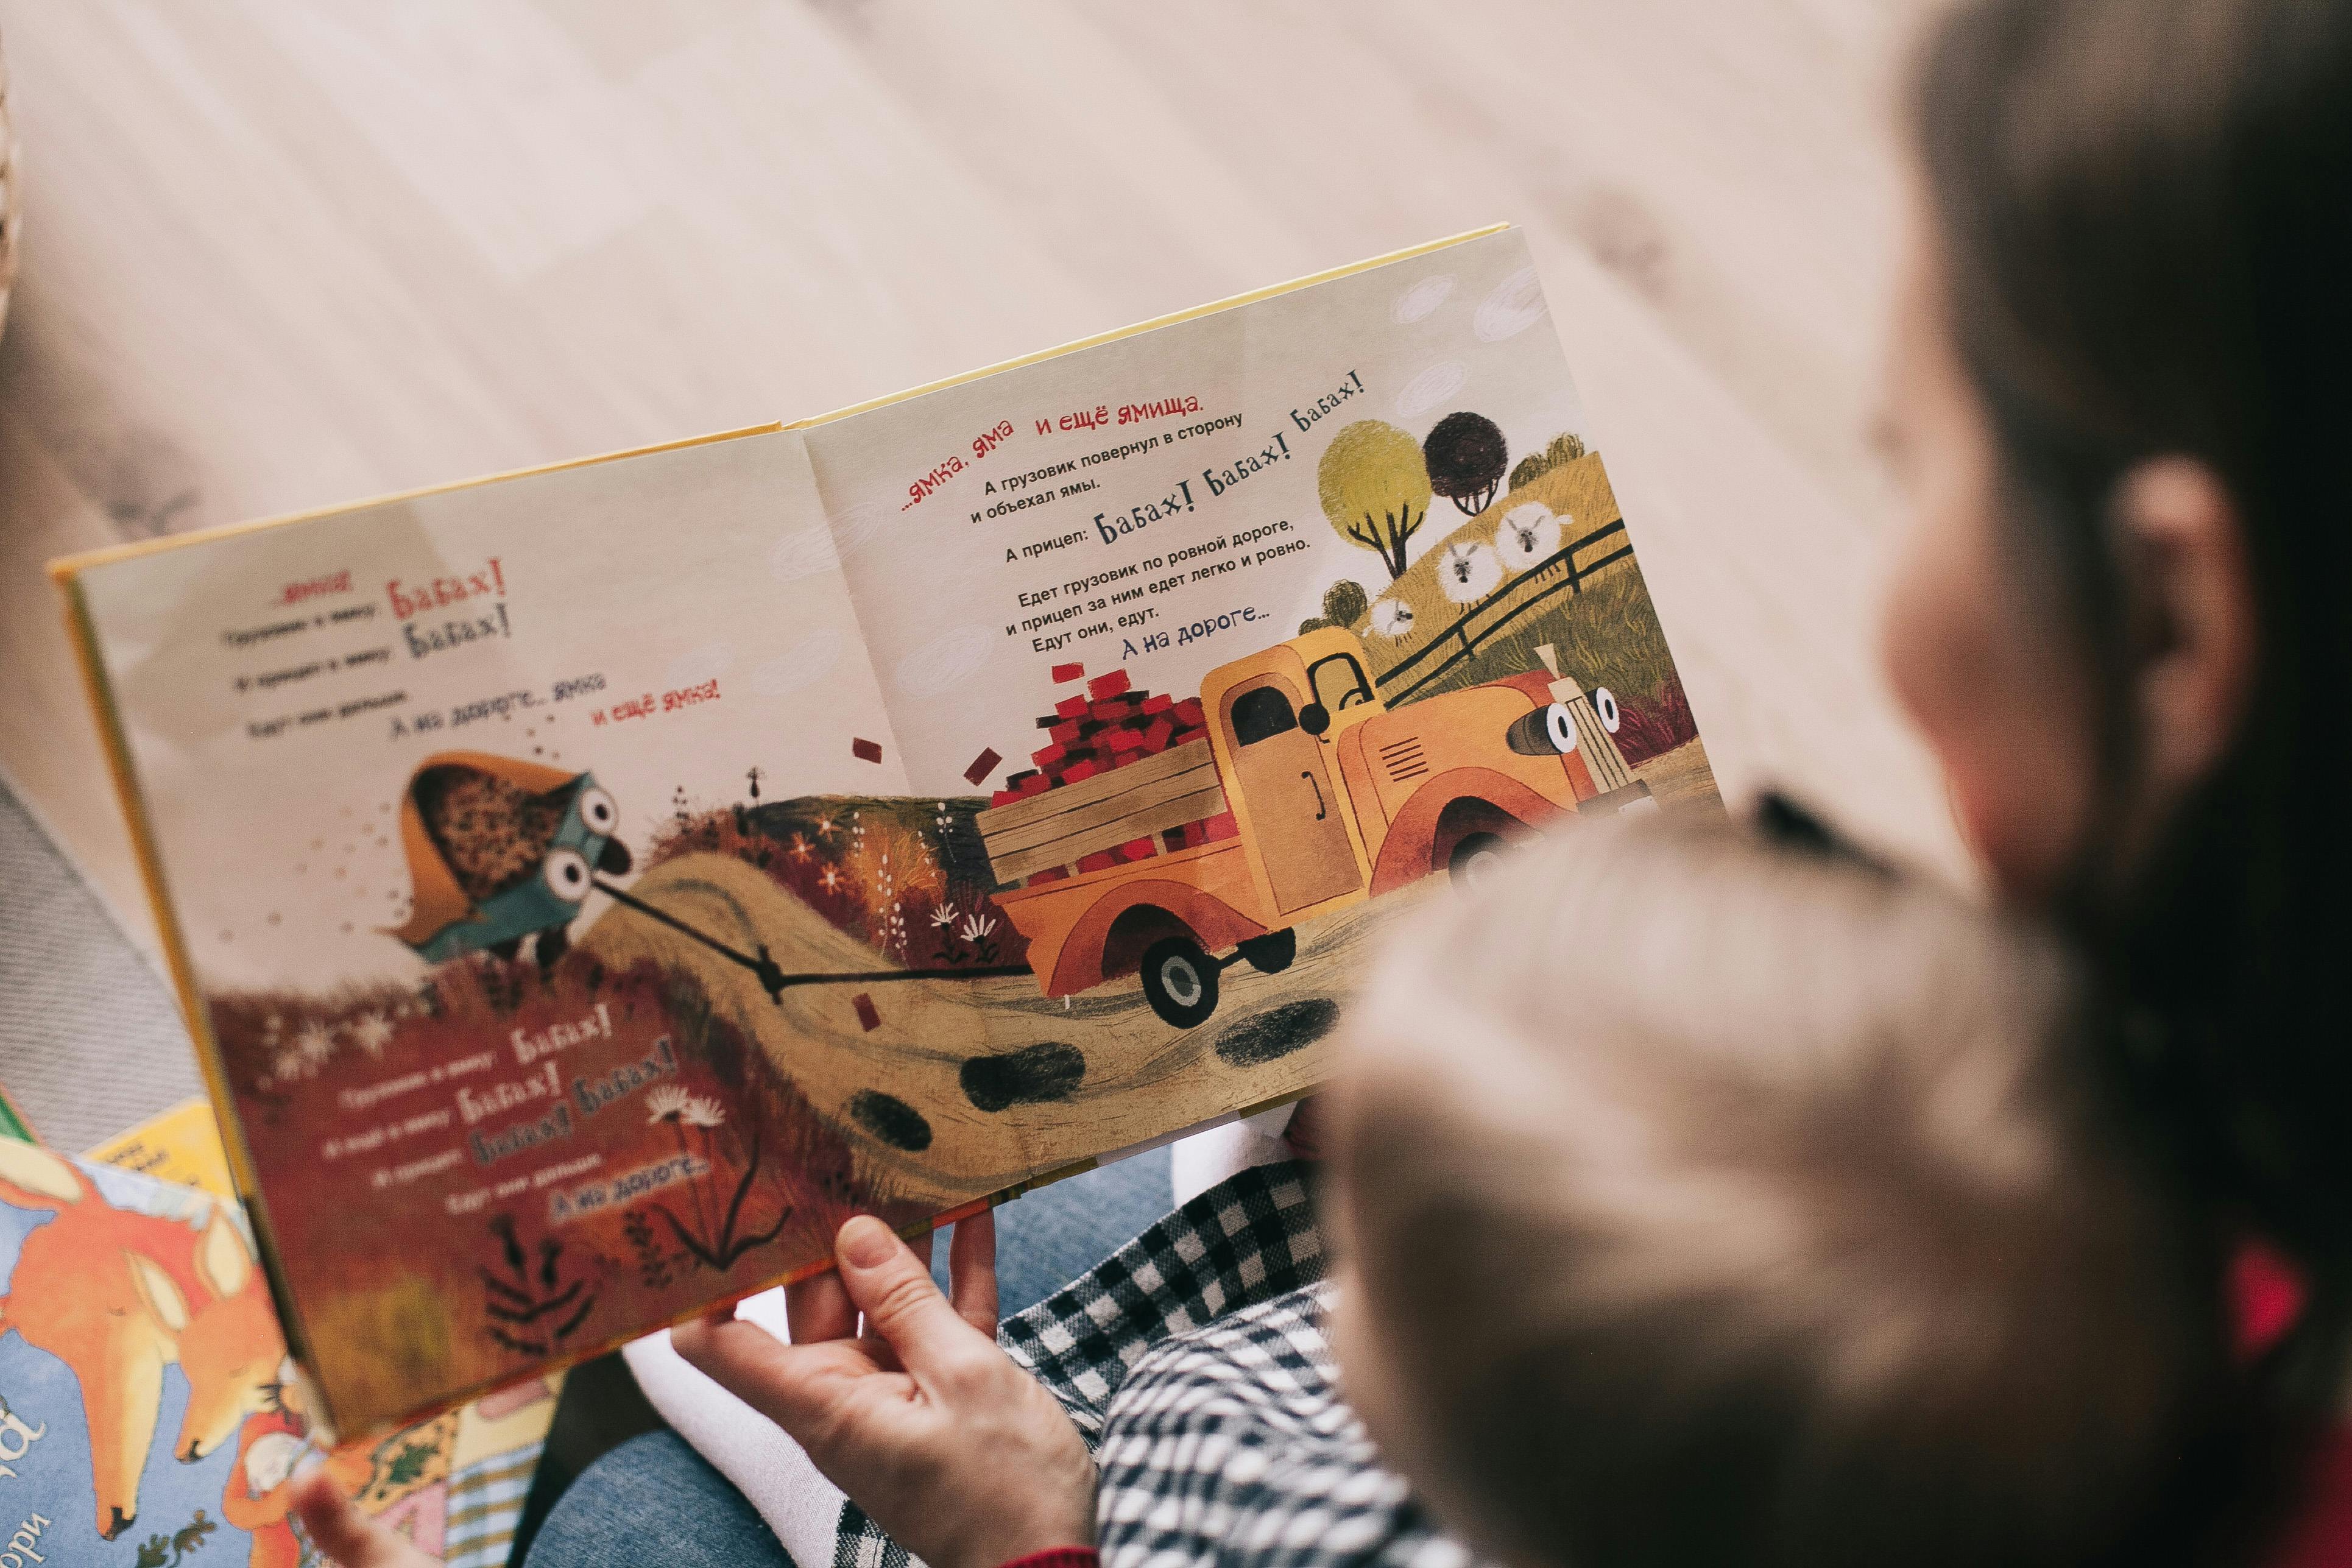 A woman reading a book to a child | Source: Pexels